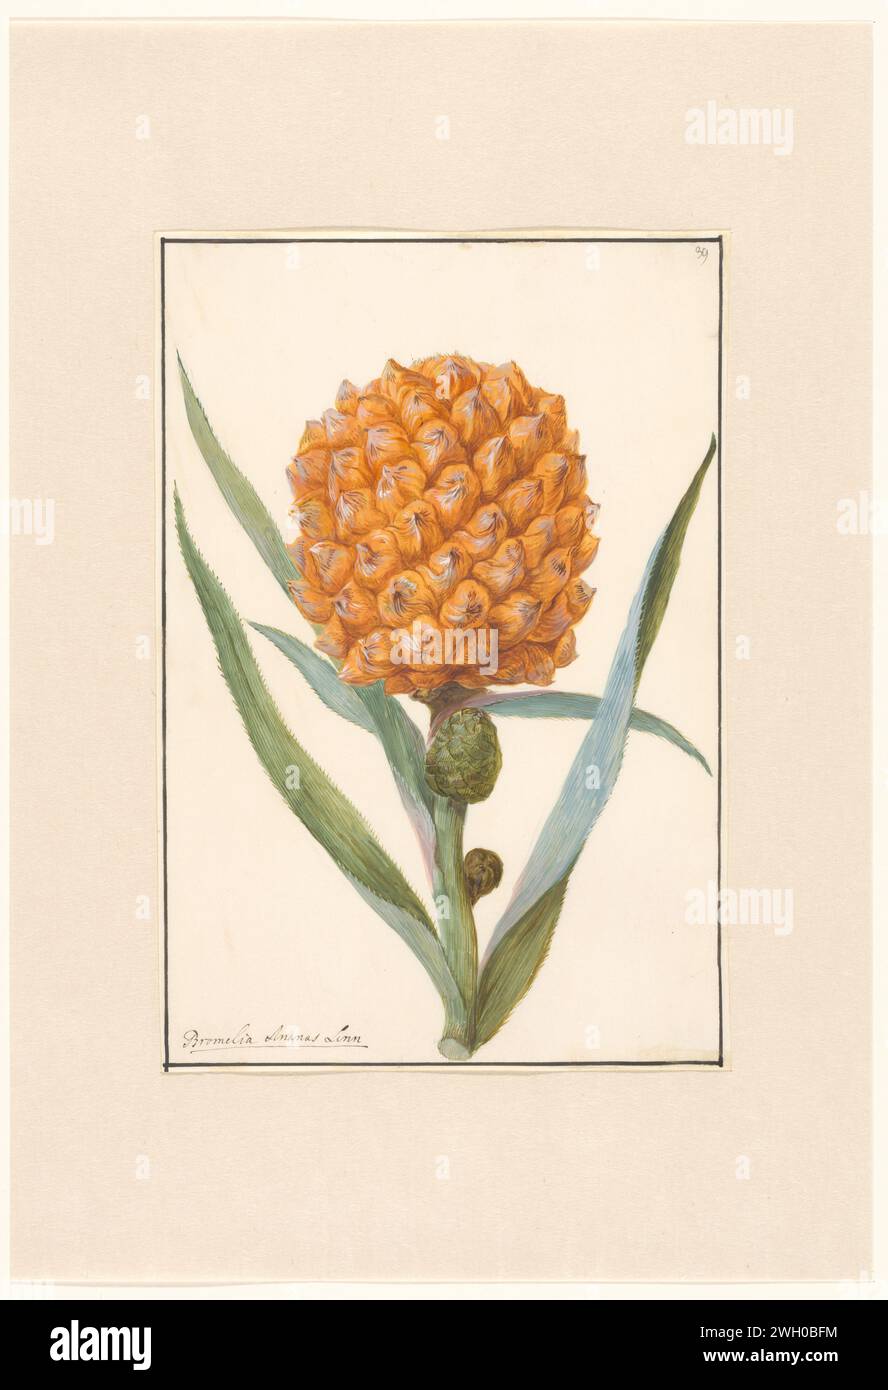 Pineapple on branch, anonymous, c. 1700 - c. 1749 drawing  Netherlands gouache (paint). pencil. parchment (animal material) brush Stock Photo